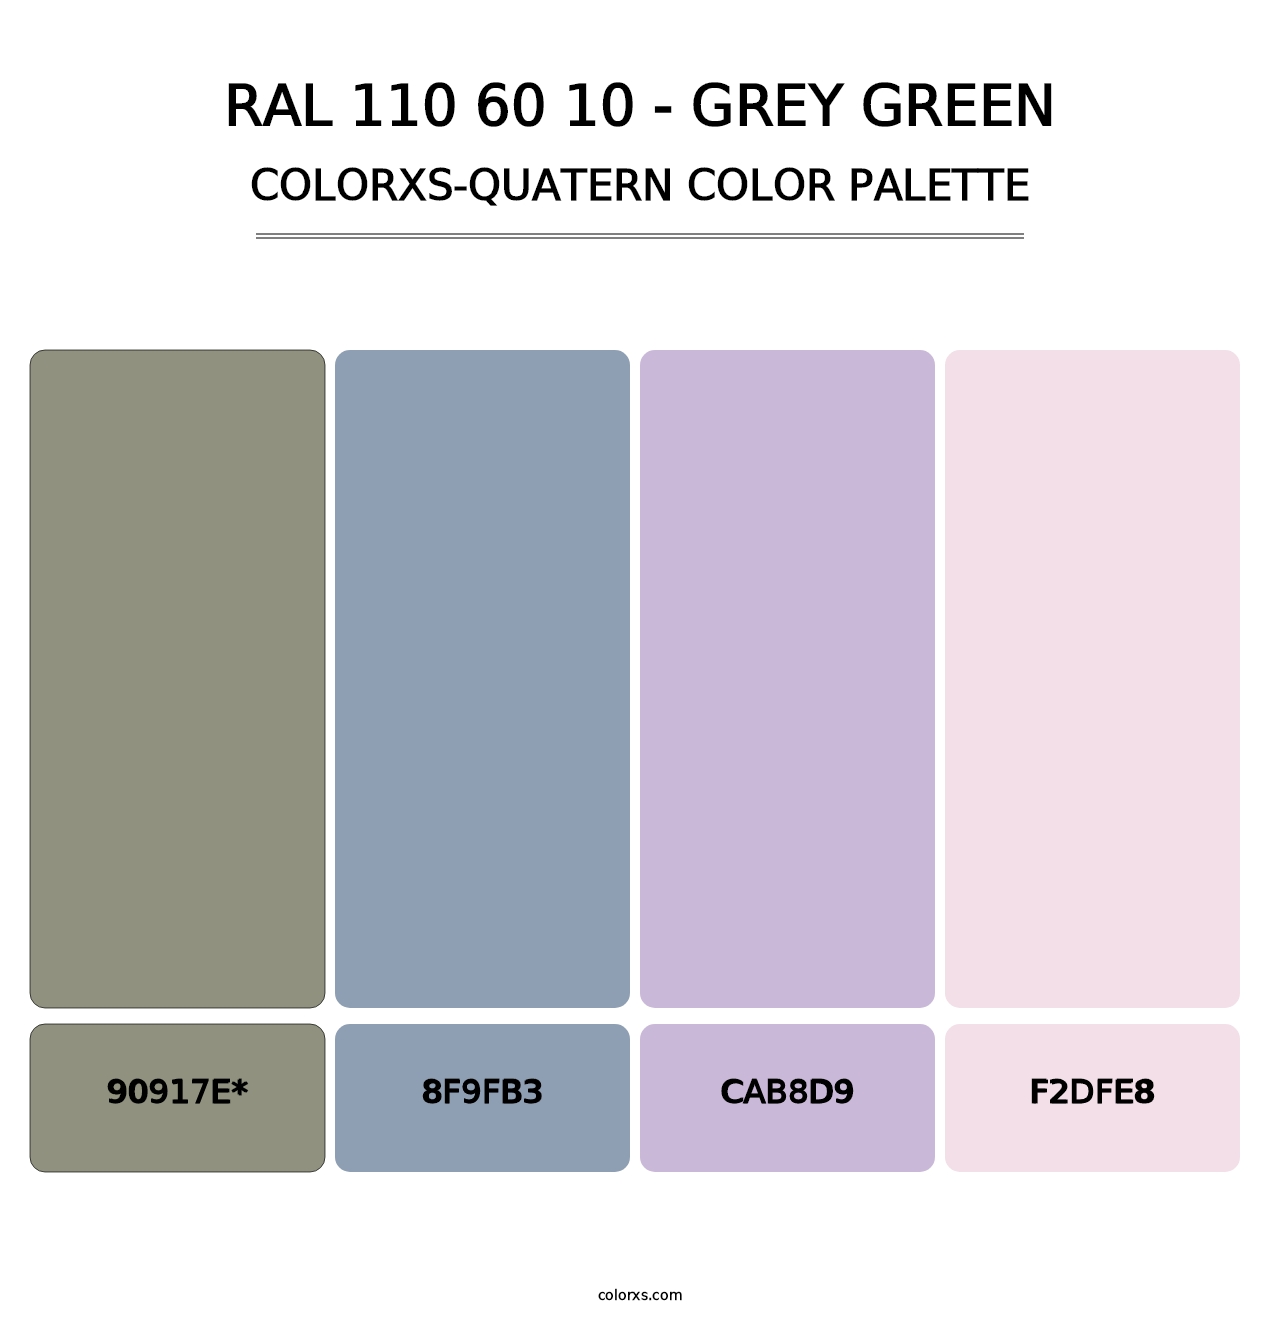 RAL 110 60 10 - Grey Green - Colorxs Quatern Palette